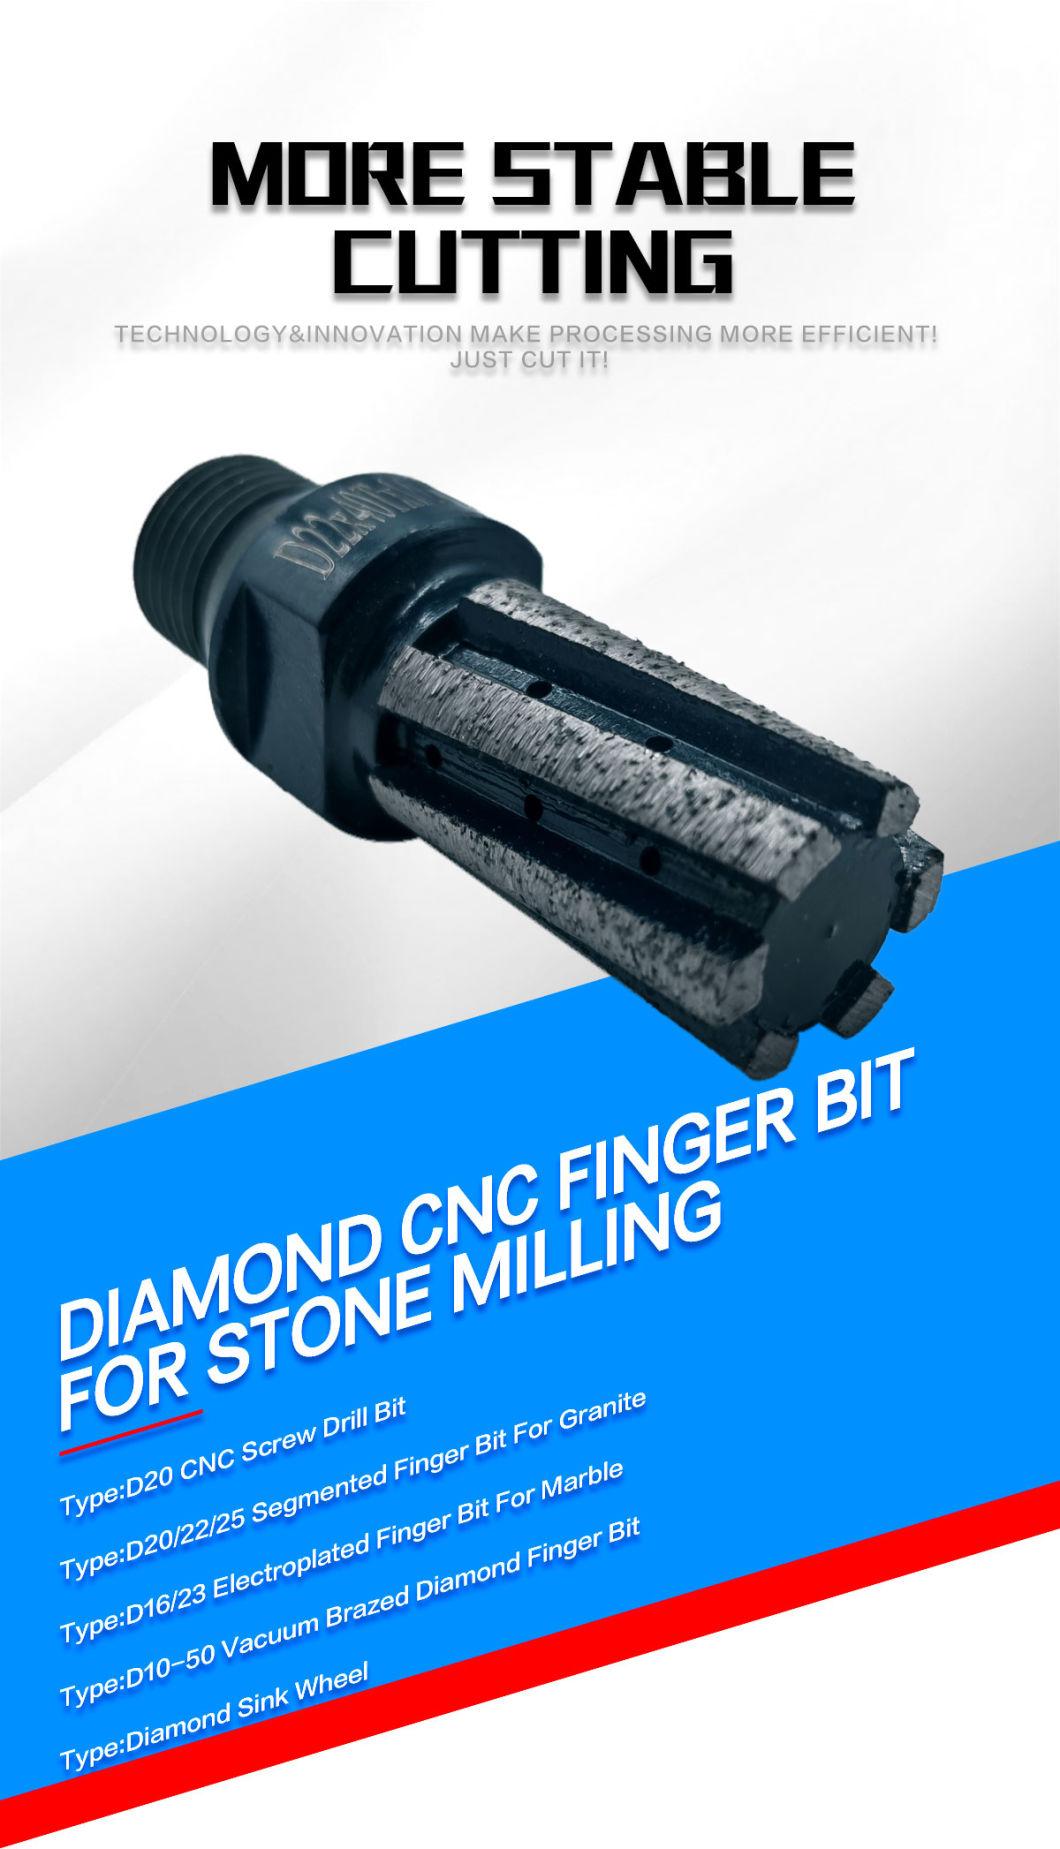 Stone Tools Milling Cutter Bit with 5 Segments for Granite Milling